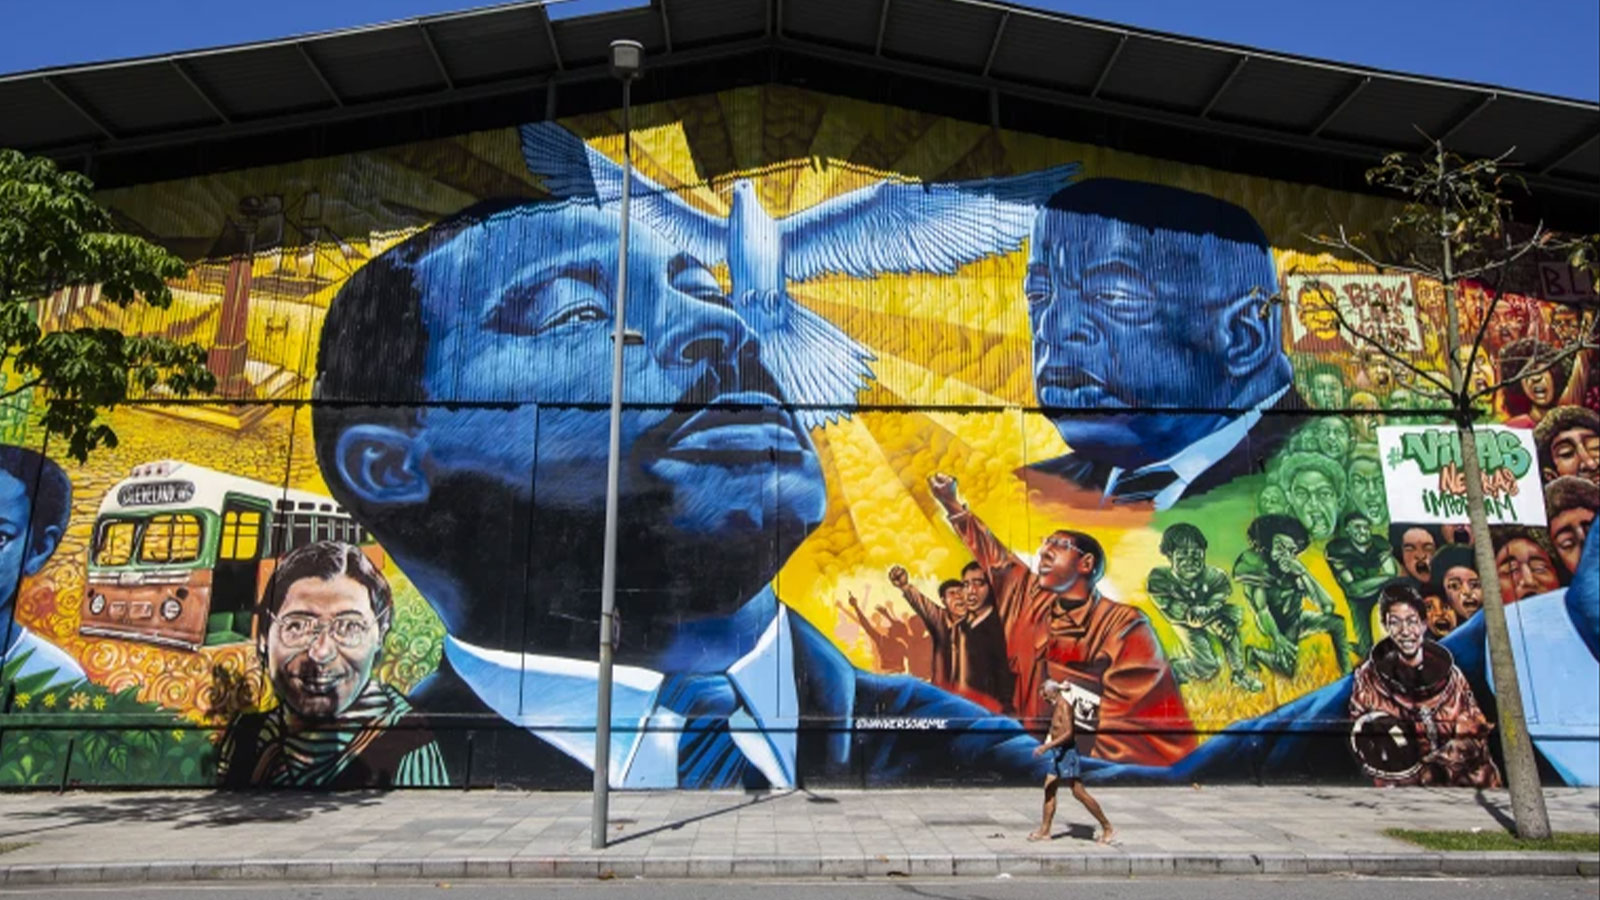 A pedestrian walks past the Sonhos de Liberdade mural created by artist Acme, which honors leaders in the fight for racial equality, in the Porto art district of Rio de Janeiro, Brazil, Nov. 17, 2021. 